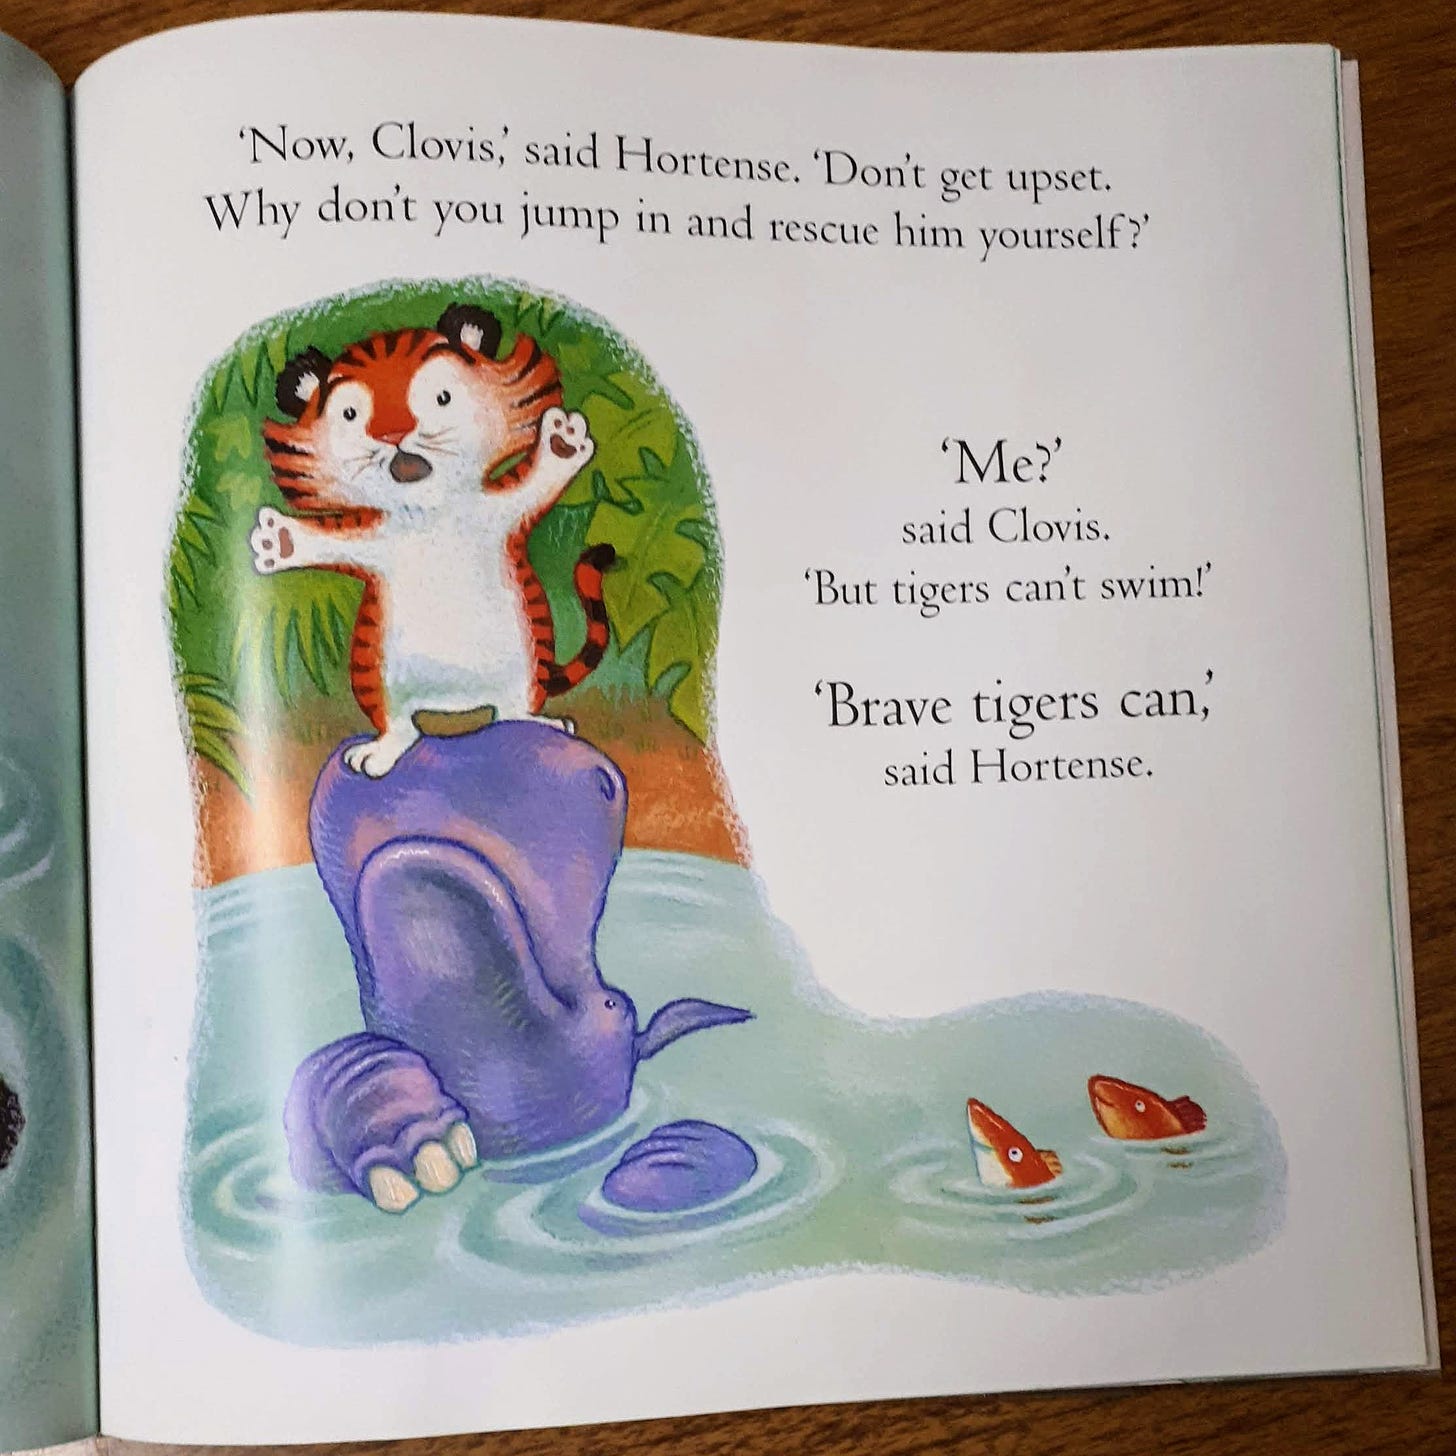 A page from a children's book with dialogue between a tiger named Clovis and a hippo named Hortense.